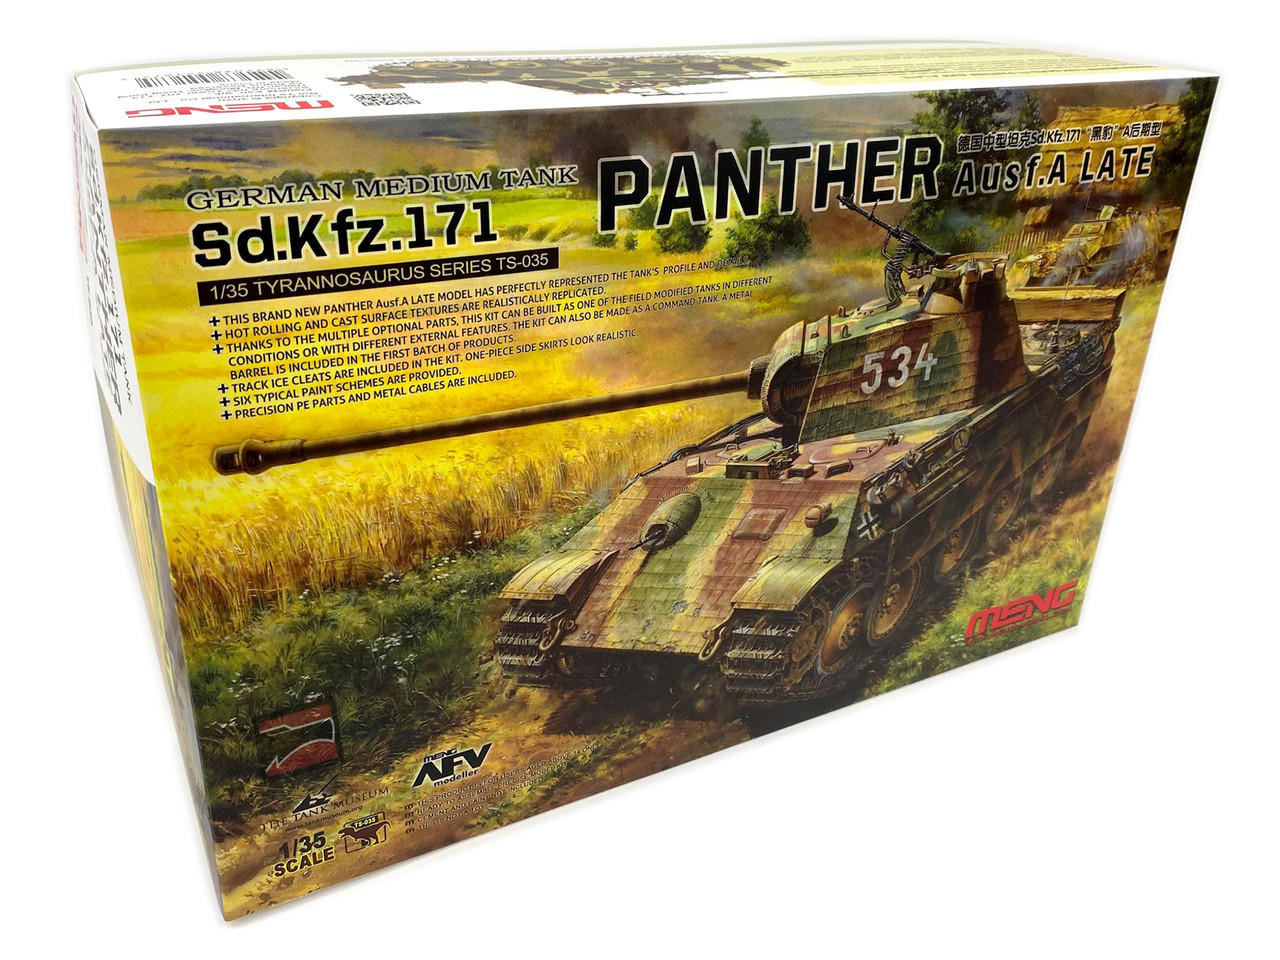 MENTS35 1/35 Meng SdKfz 171 Panther Ausf A Late German Medium Tank MMD Squadron